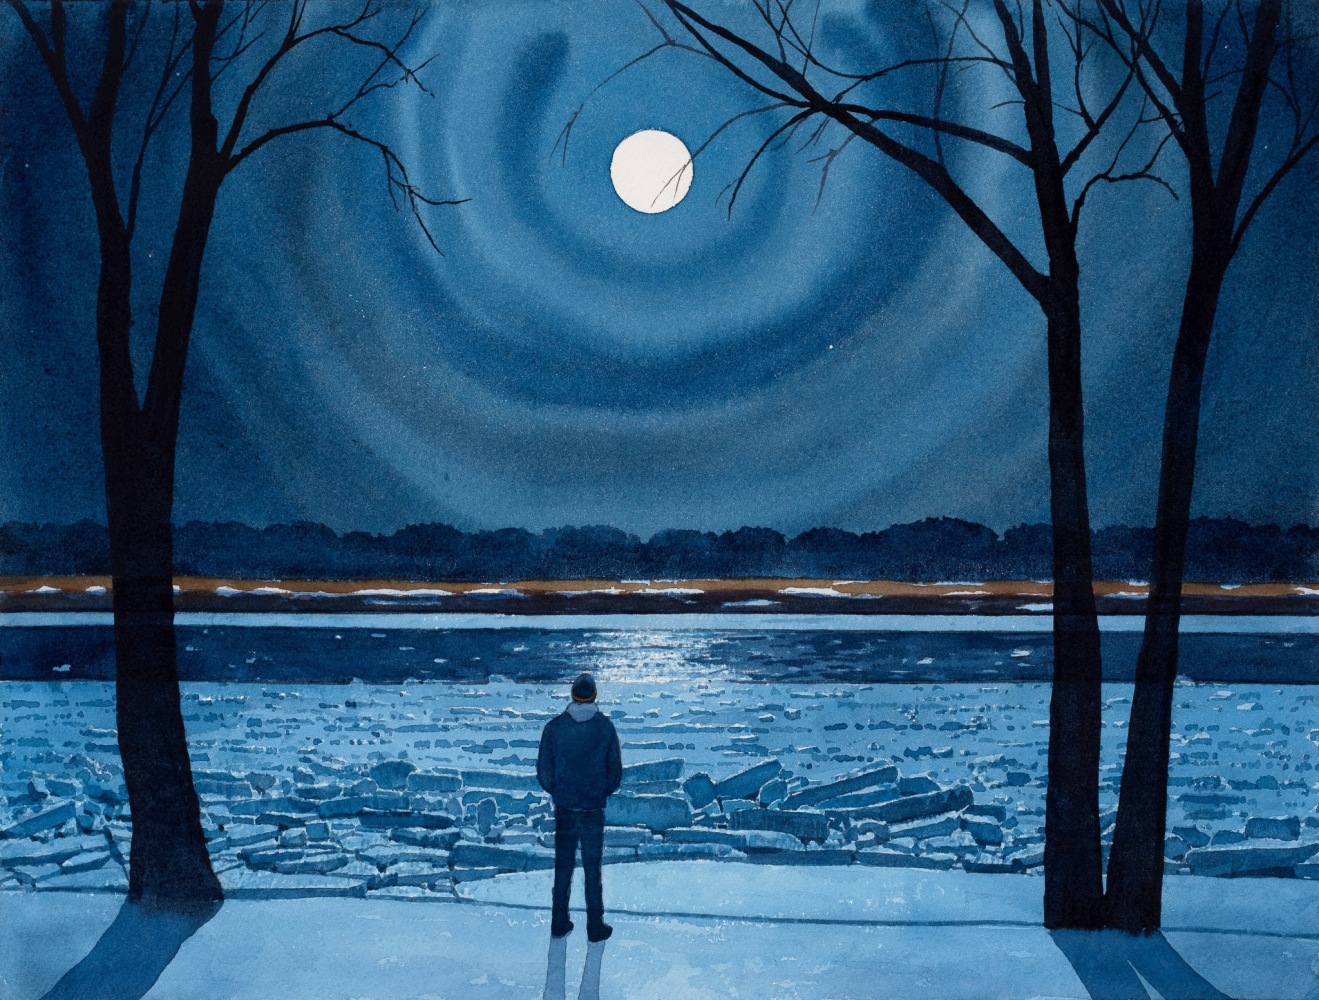 Tim Gardner

Man in Moonlight, Red River

2020

Watercolor on paper

12 1/8&amp;nbsp; x 16 1/8 inches (30.8 x 41 cm)

TG 591

INQUIRE